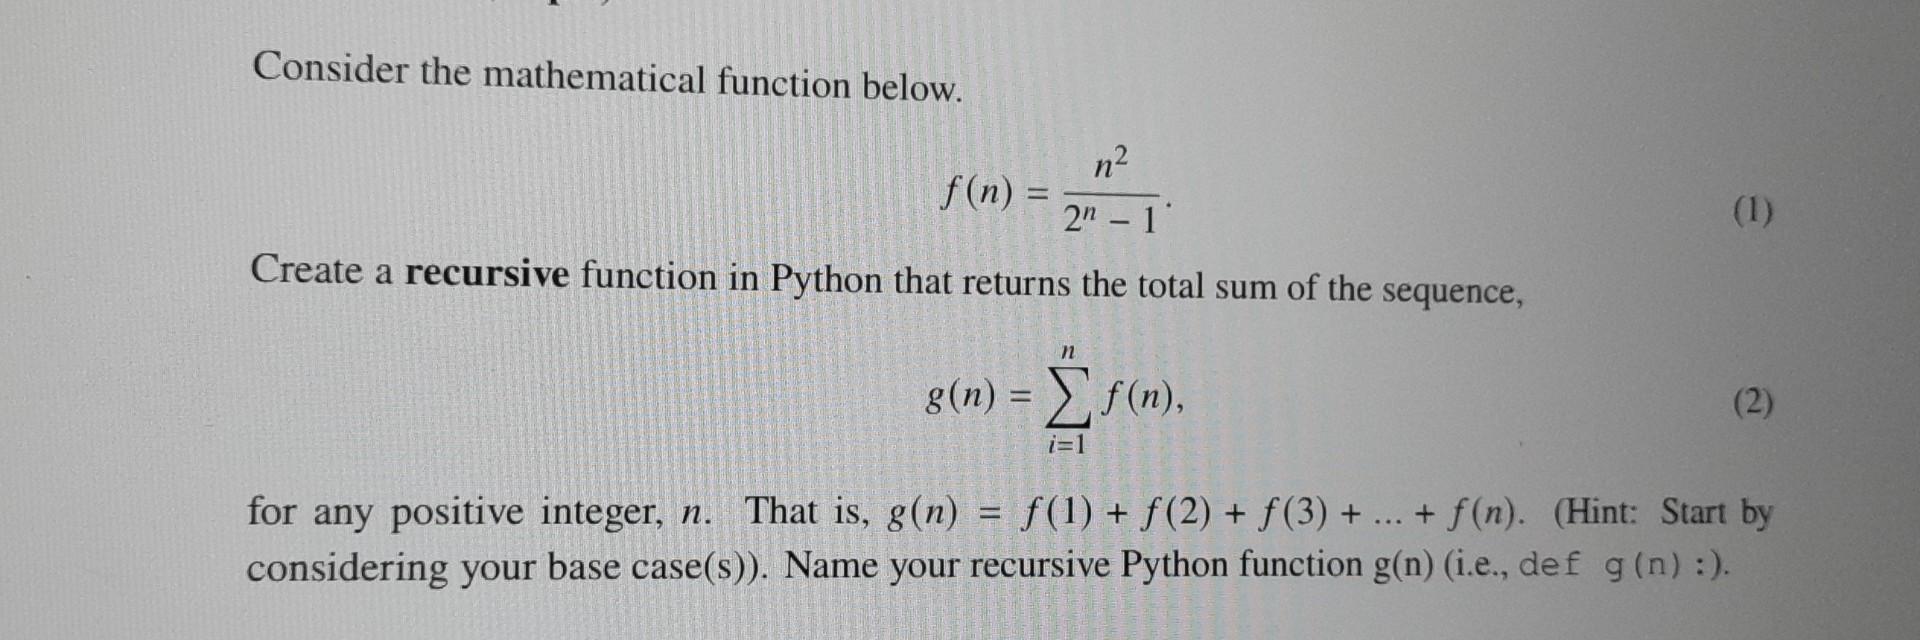 Consider the mathematical function below. n 2n - 1 Create a recursive function in Python that returns the